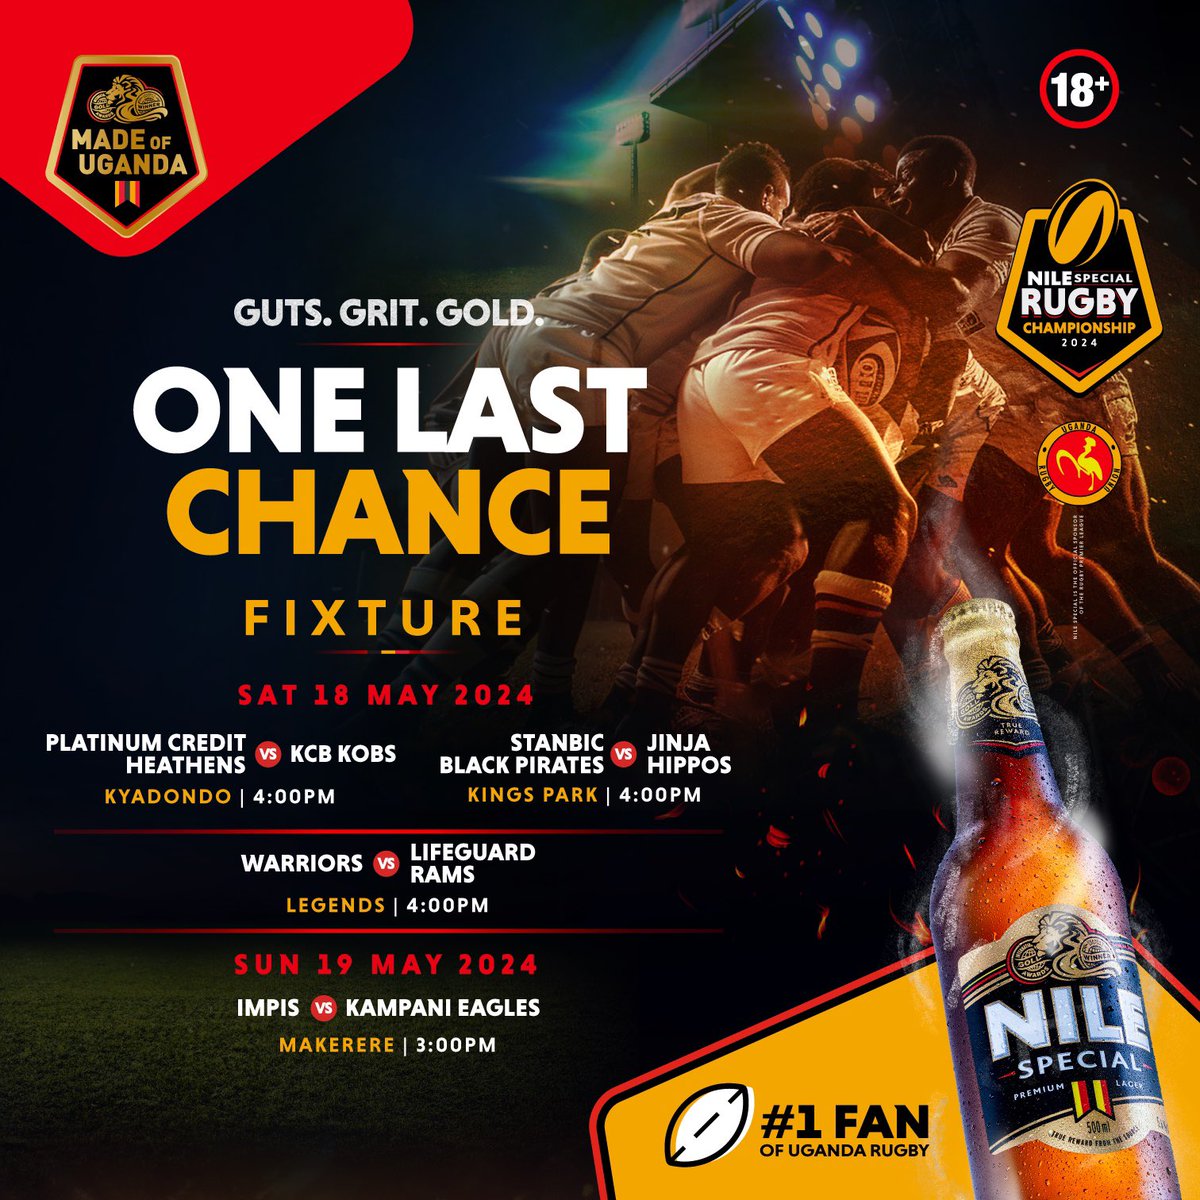 Saturday is rugby day…. And the big boys will be in the last Semi final round. I have a good feeling about my team..
#RaiseYourGame 
#GutsGritGold 
#NileSpecialRugby